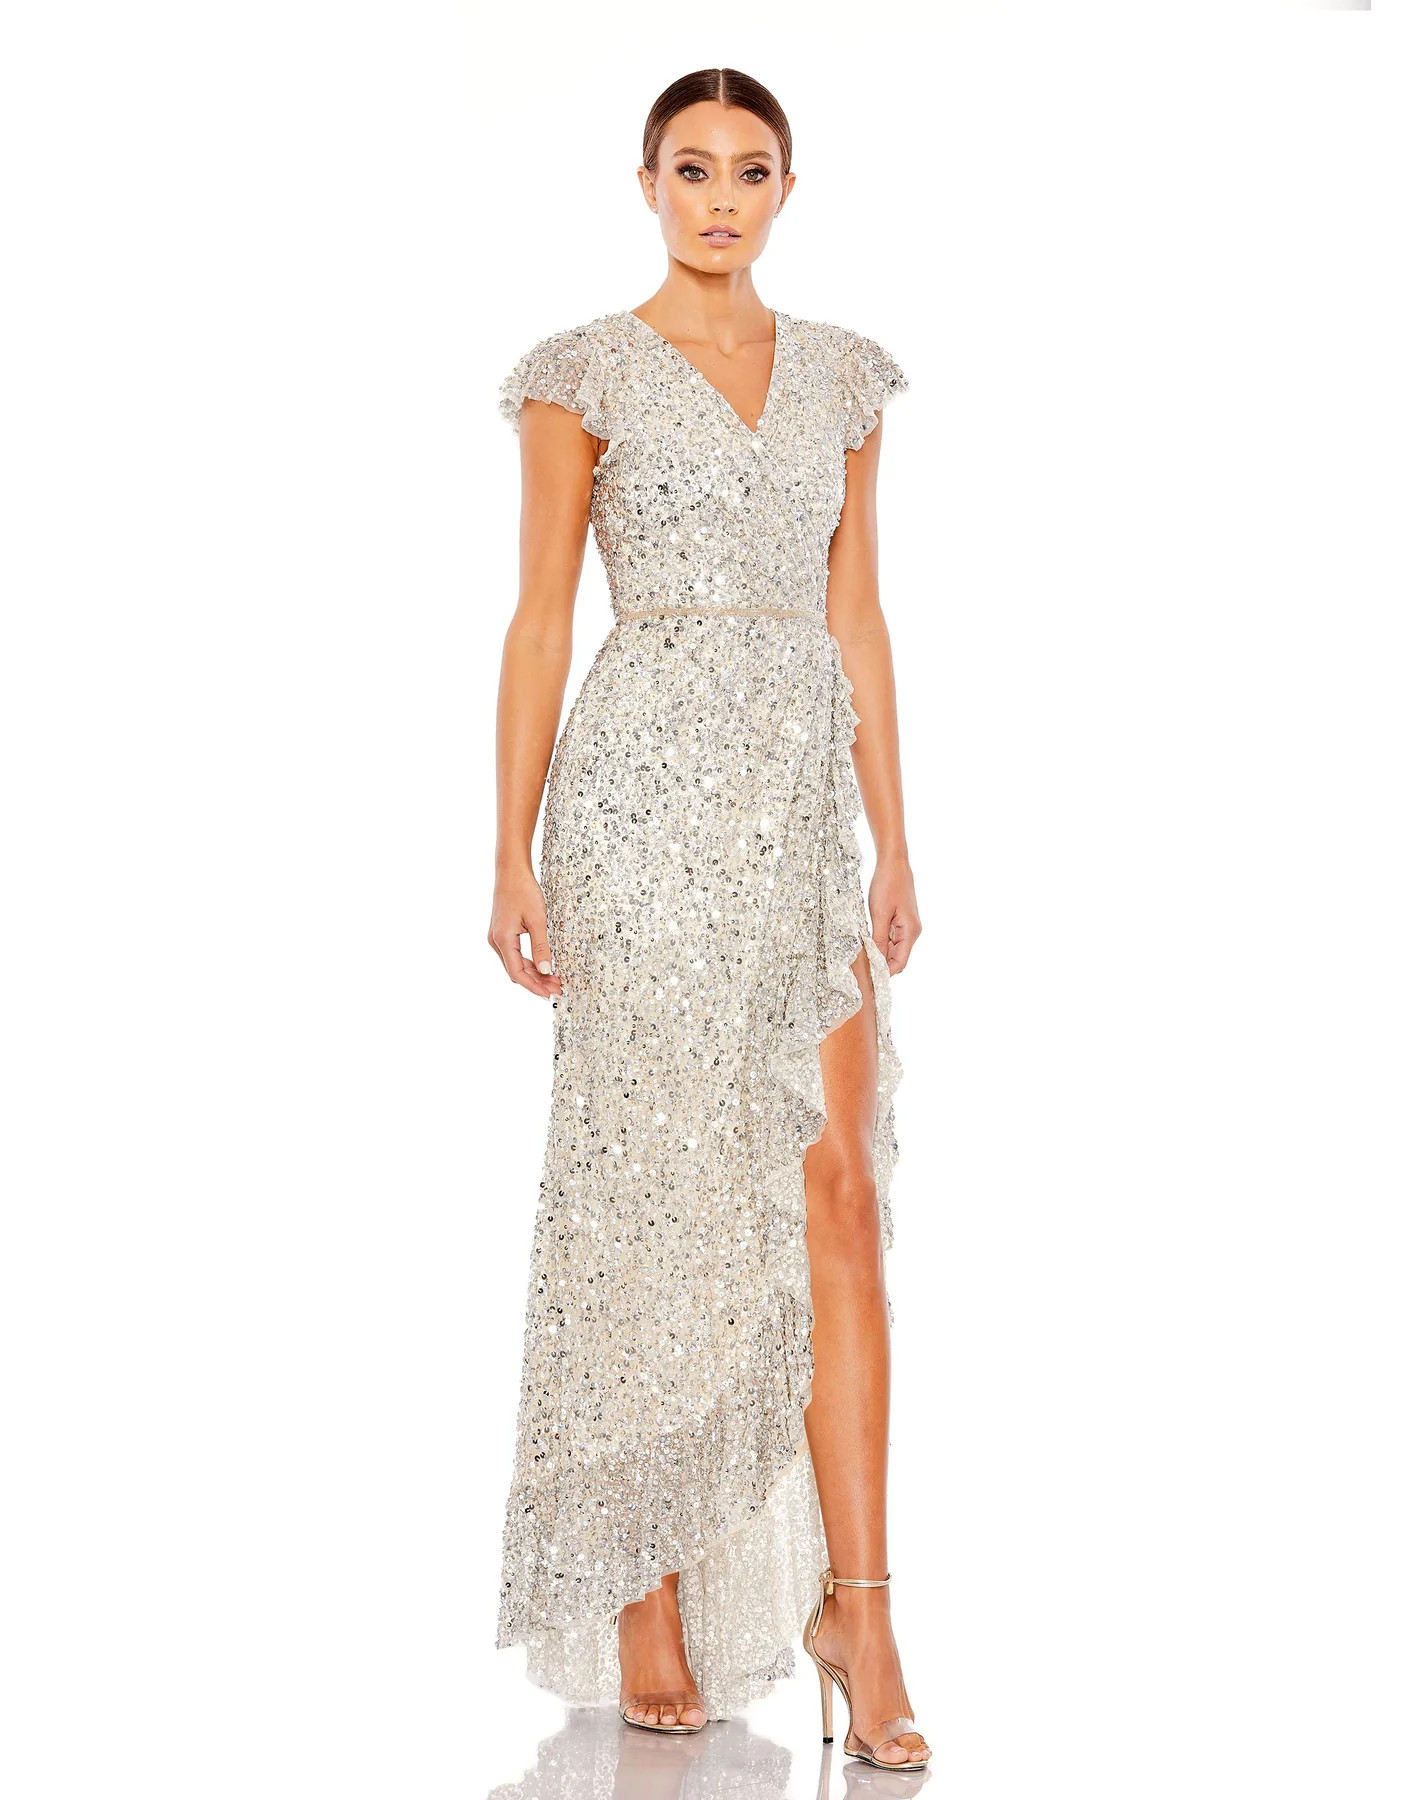 MAC DUGGAL 70113. Authentic dress. NWT. Fastest shipping. Best retailer ... - $398.00